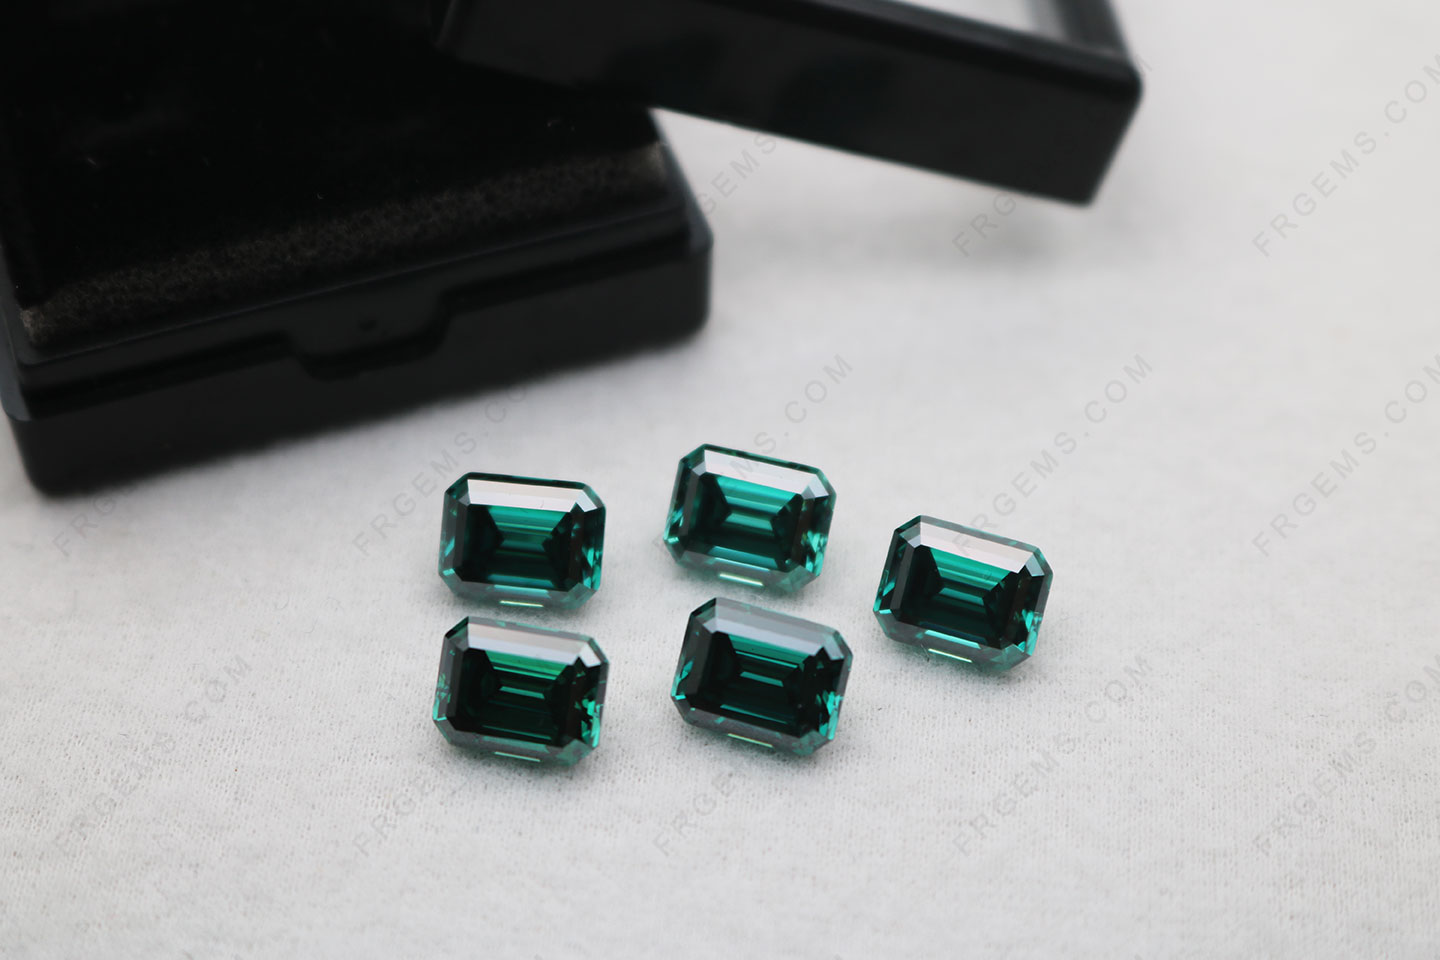 Emerald Green Color Moissanite VVS Top quality 9x7mm Emerald cut loose Moissanite gemstones factory in China